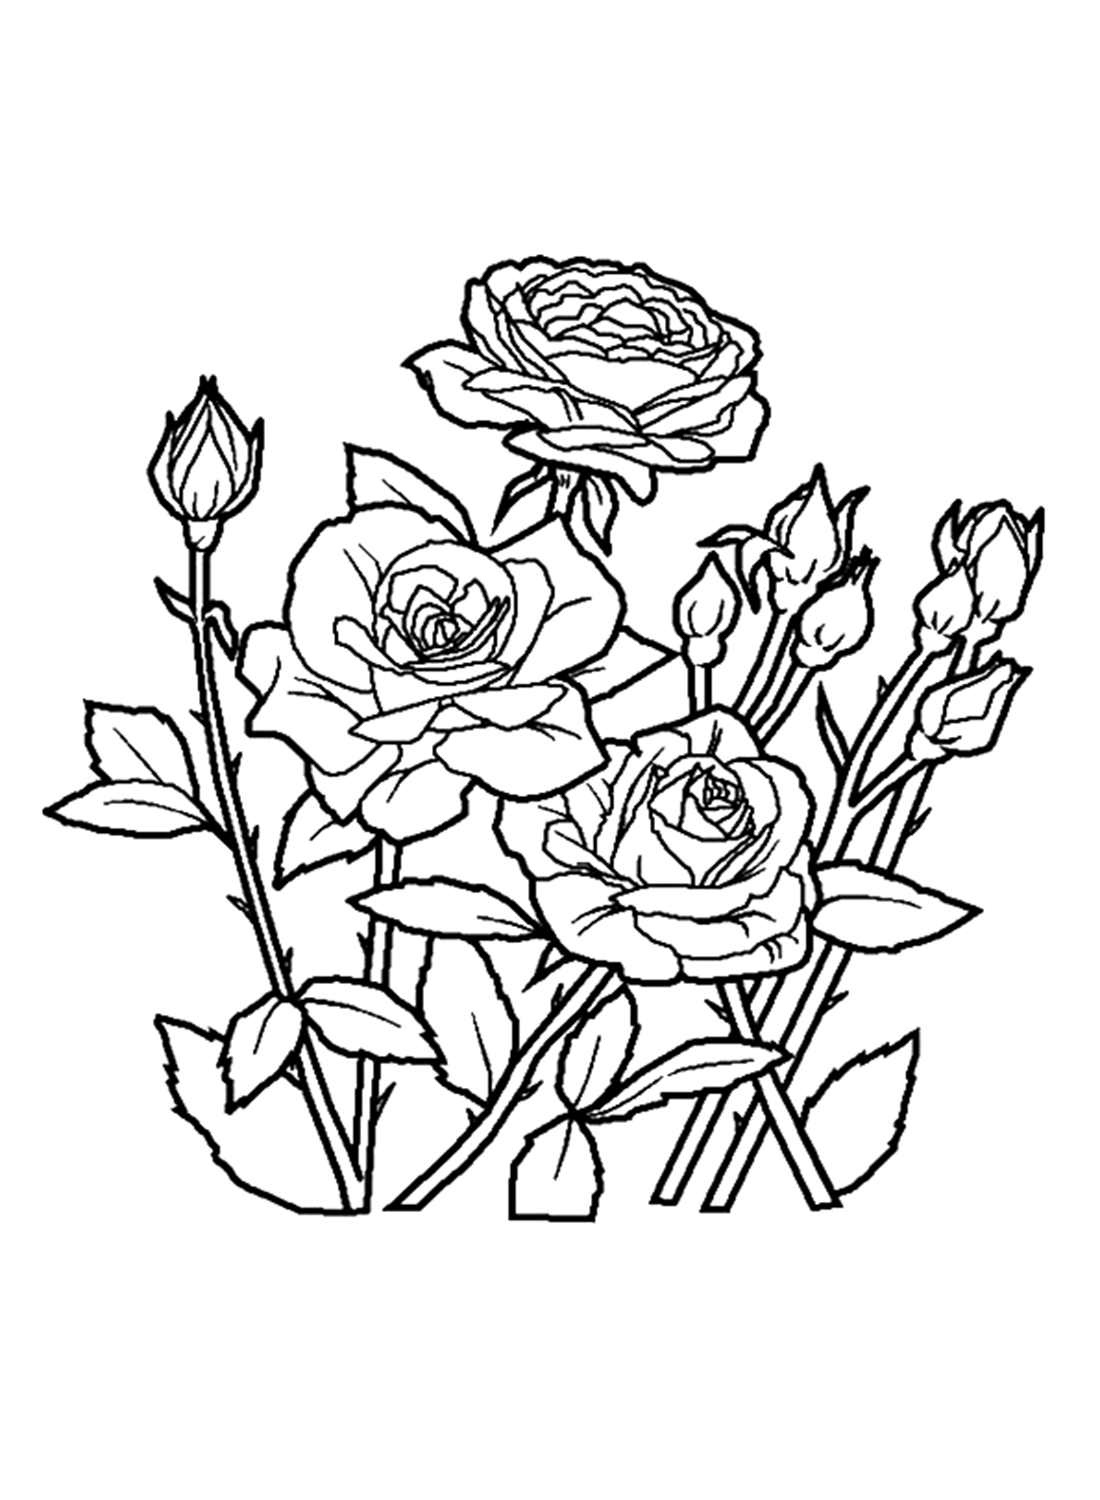 The Spring Rose Coloring Pages